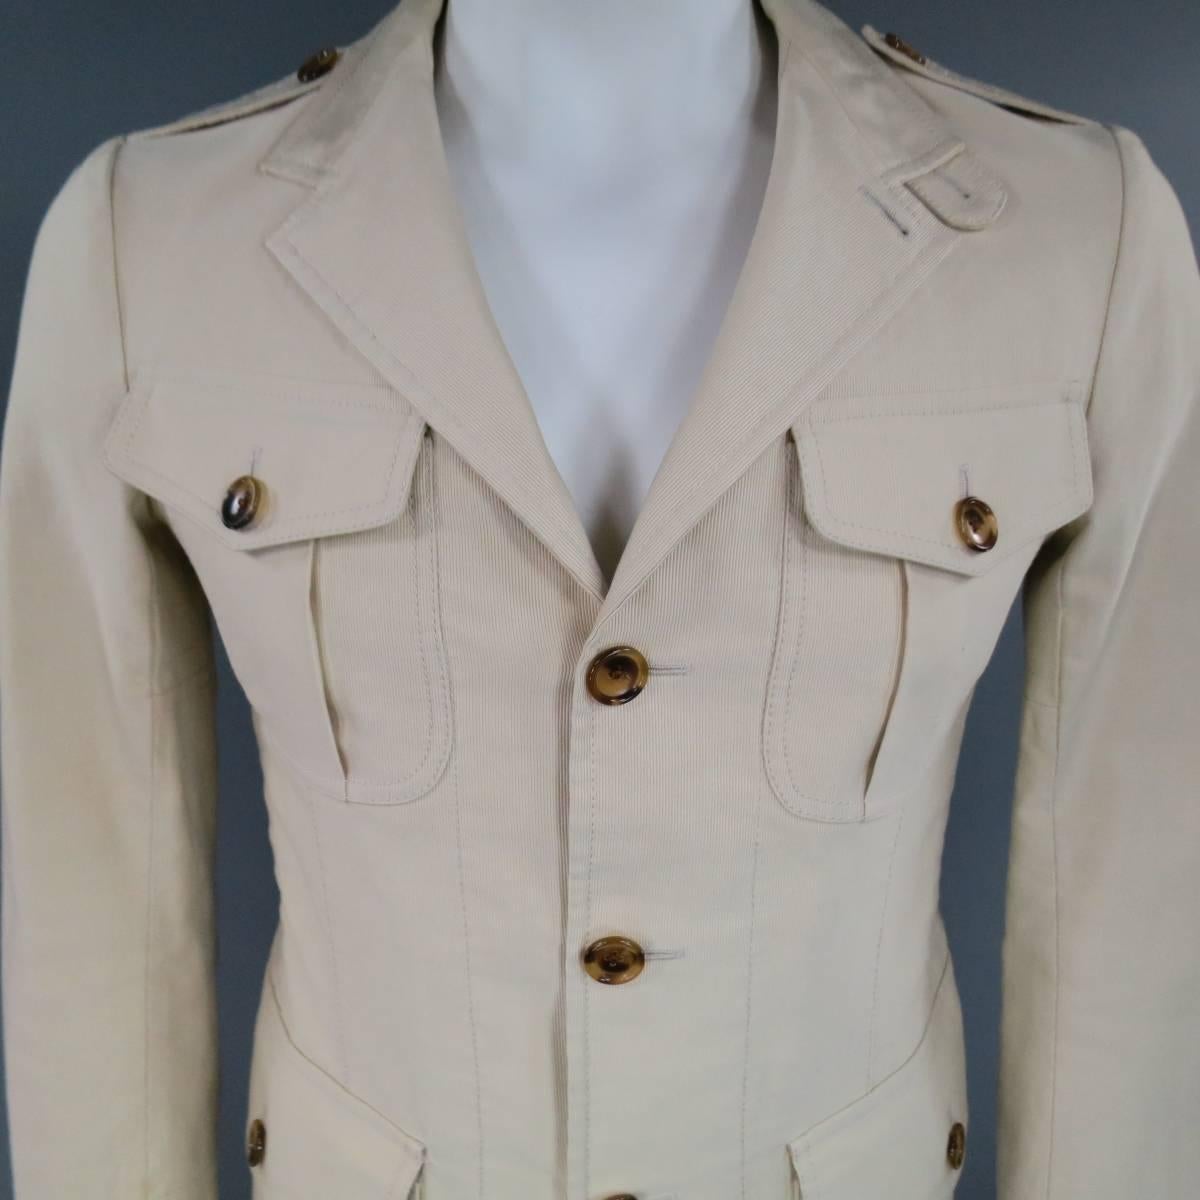 TOM FORD Jacket consists of cotton material in a rich beige / khaki color tone. Designed in a safari style, notch lapel collar with a 3-button front. Multiple patch pockets detail the top and bottom with button closures. Single button cuff and vent.